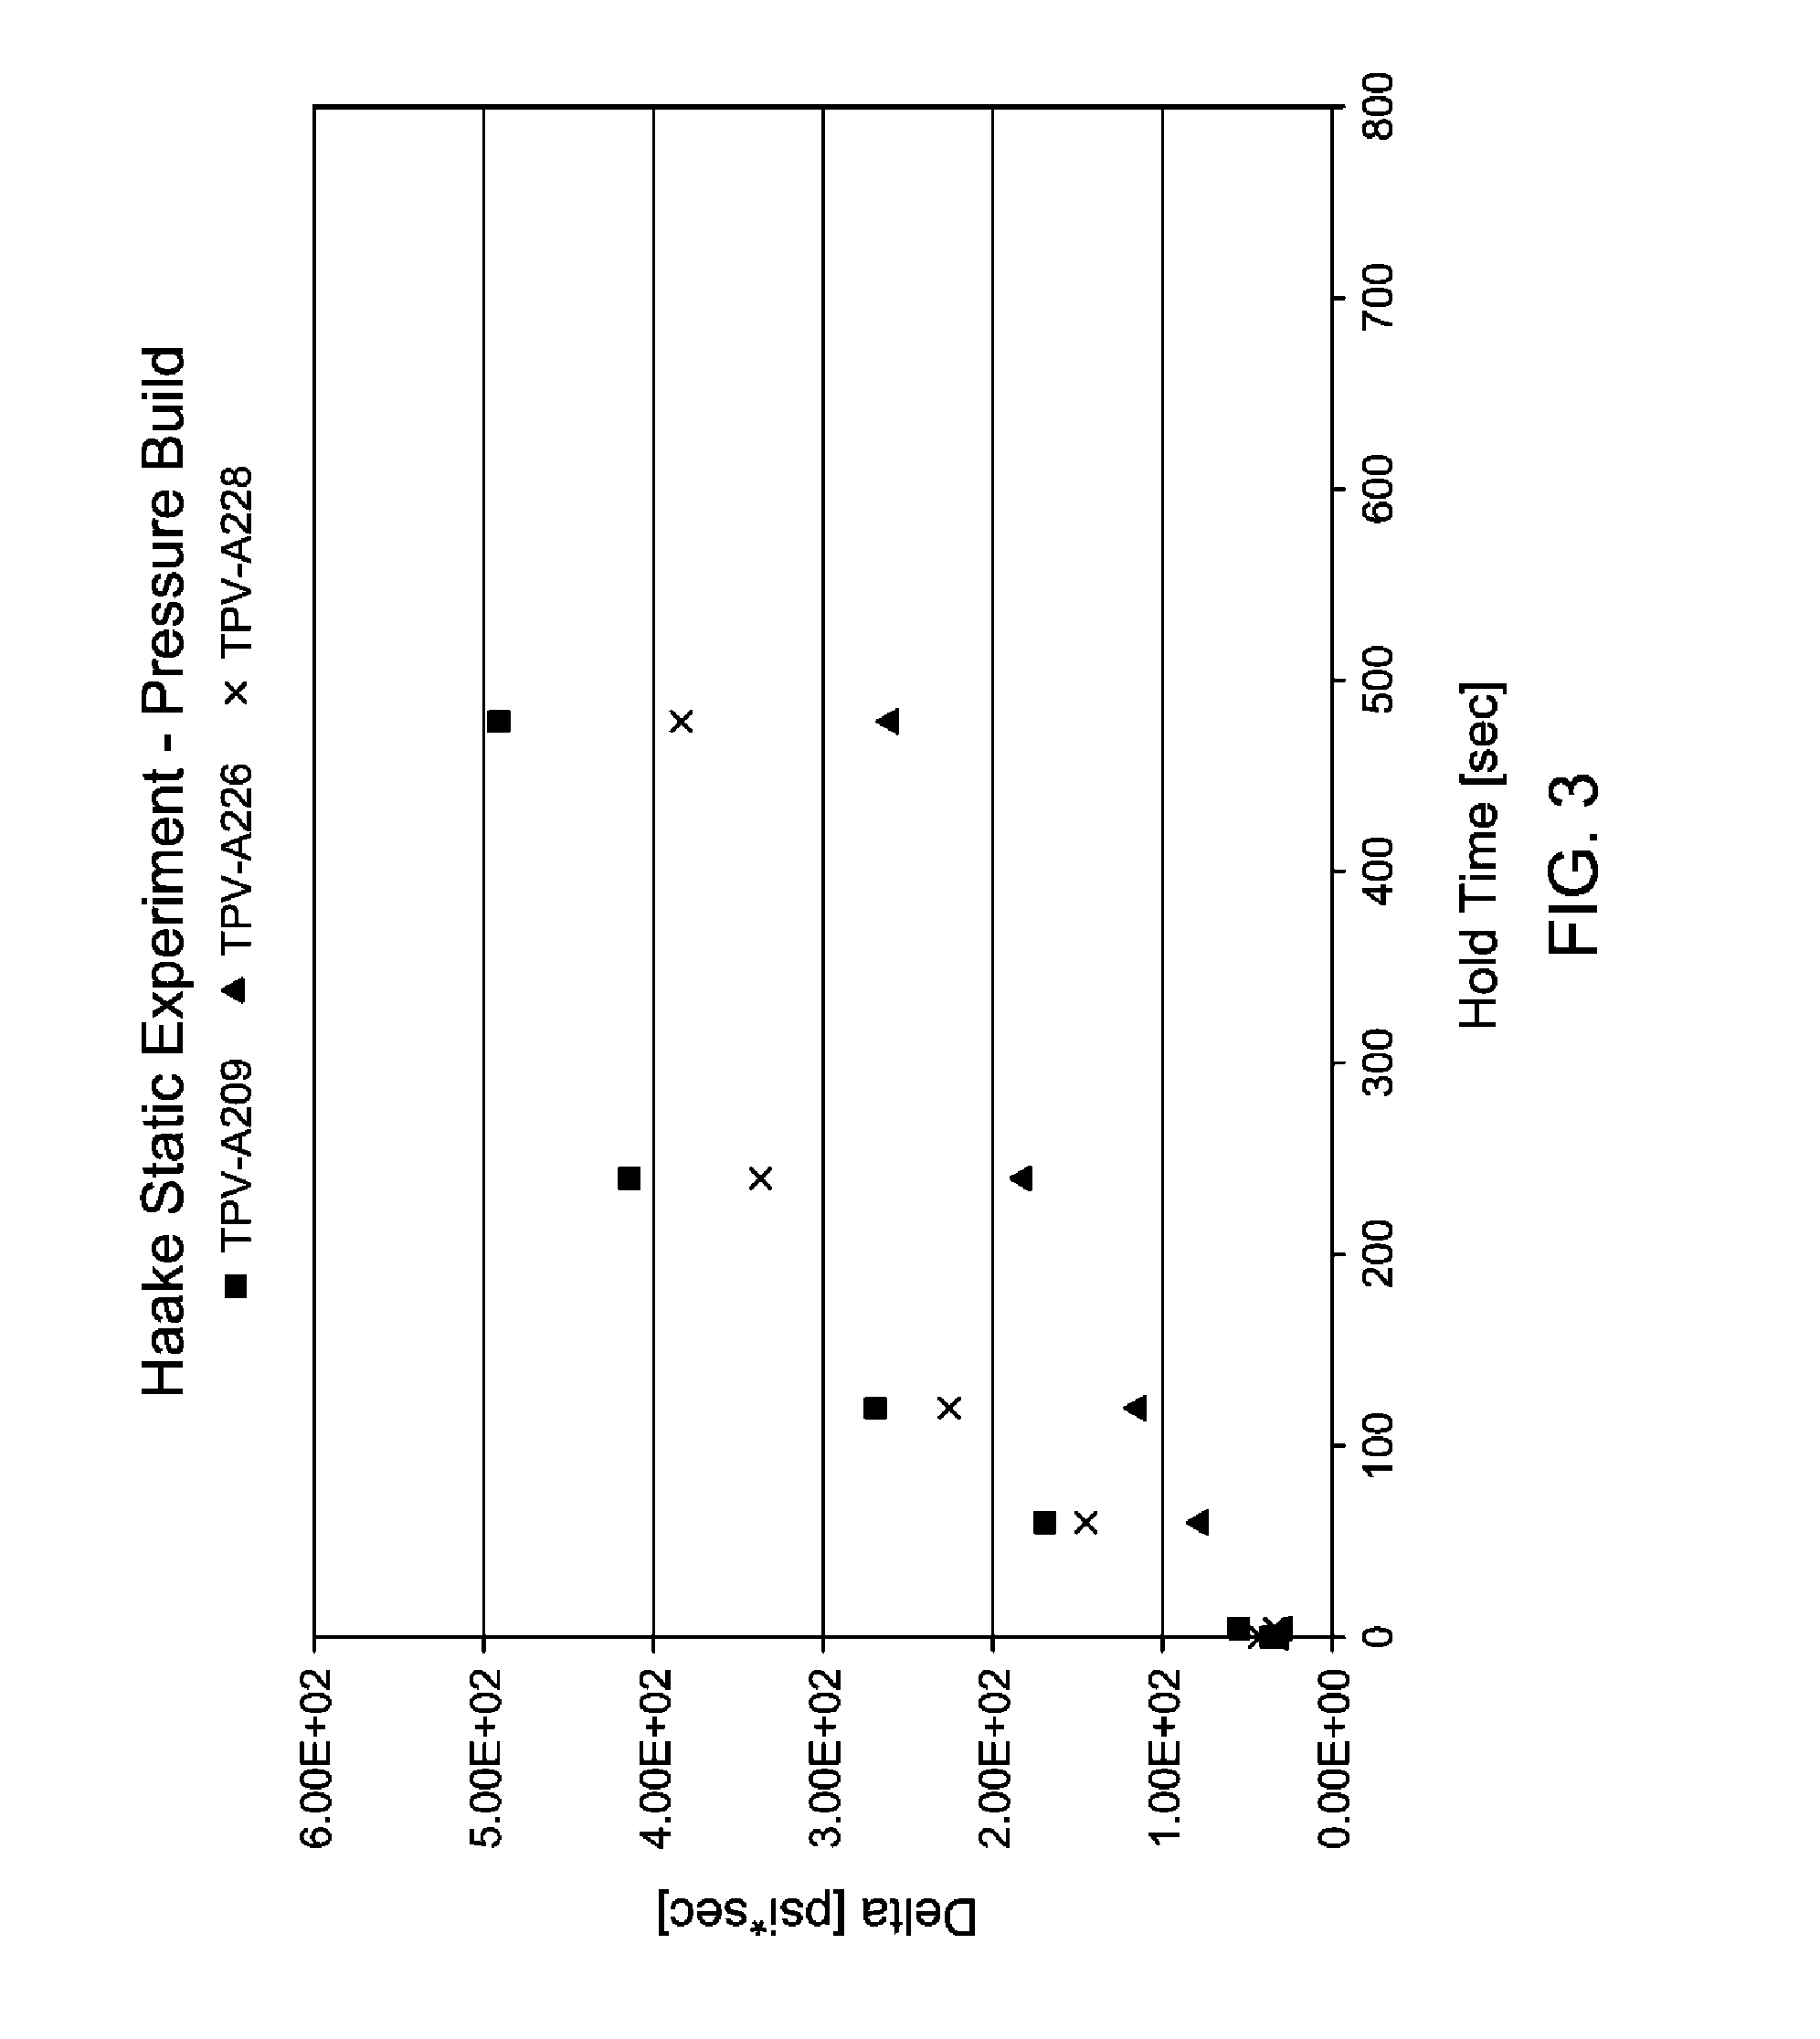 Thermoplastic Vulcanizates Comprising Propylene-Based Elastomers and Methods for Making the Same